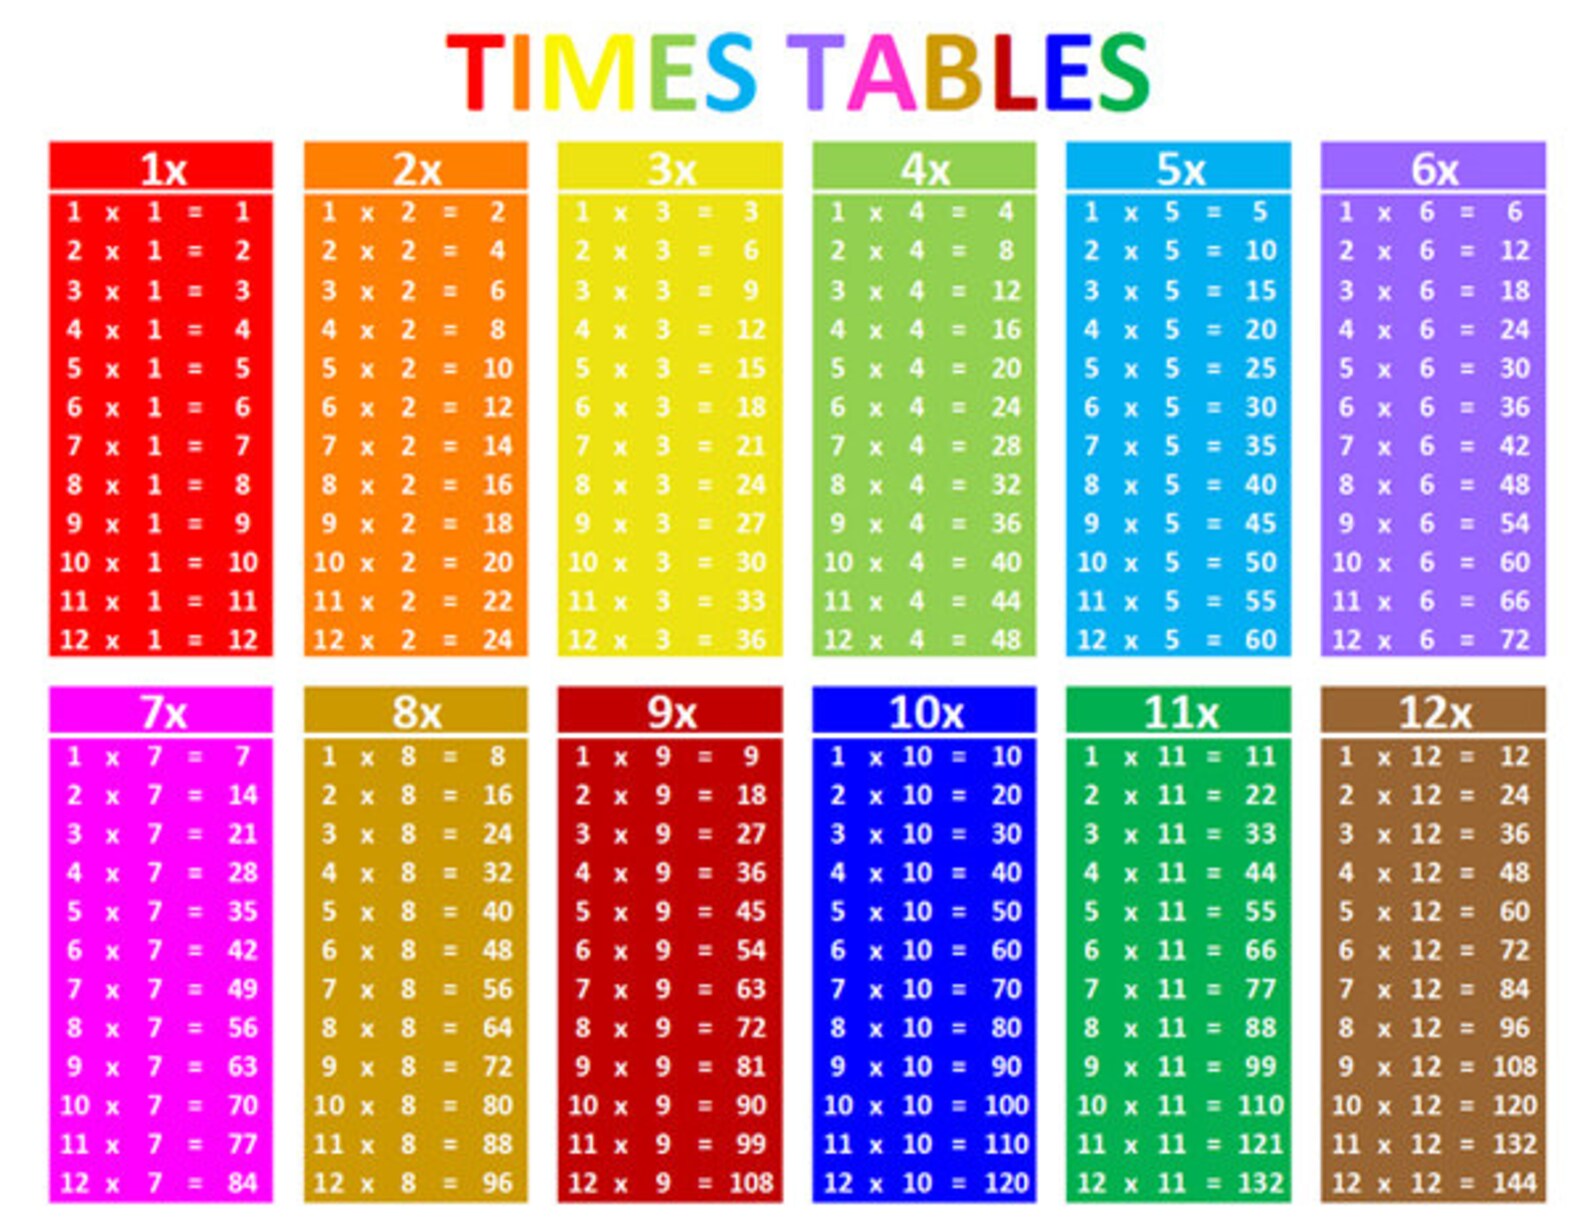 Times Tables Multiplications Tables Times Tables Grid Etsy Singapore